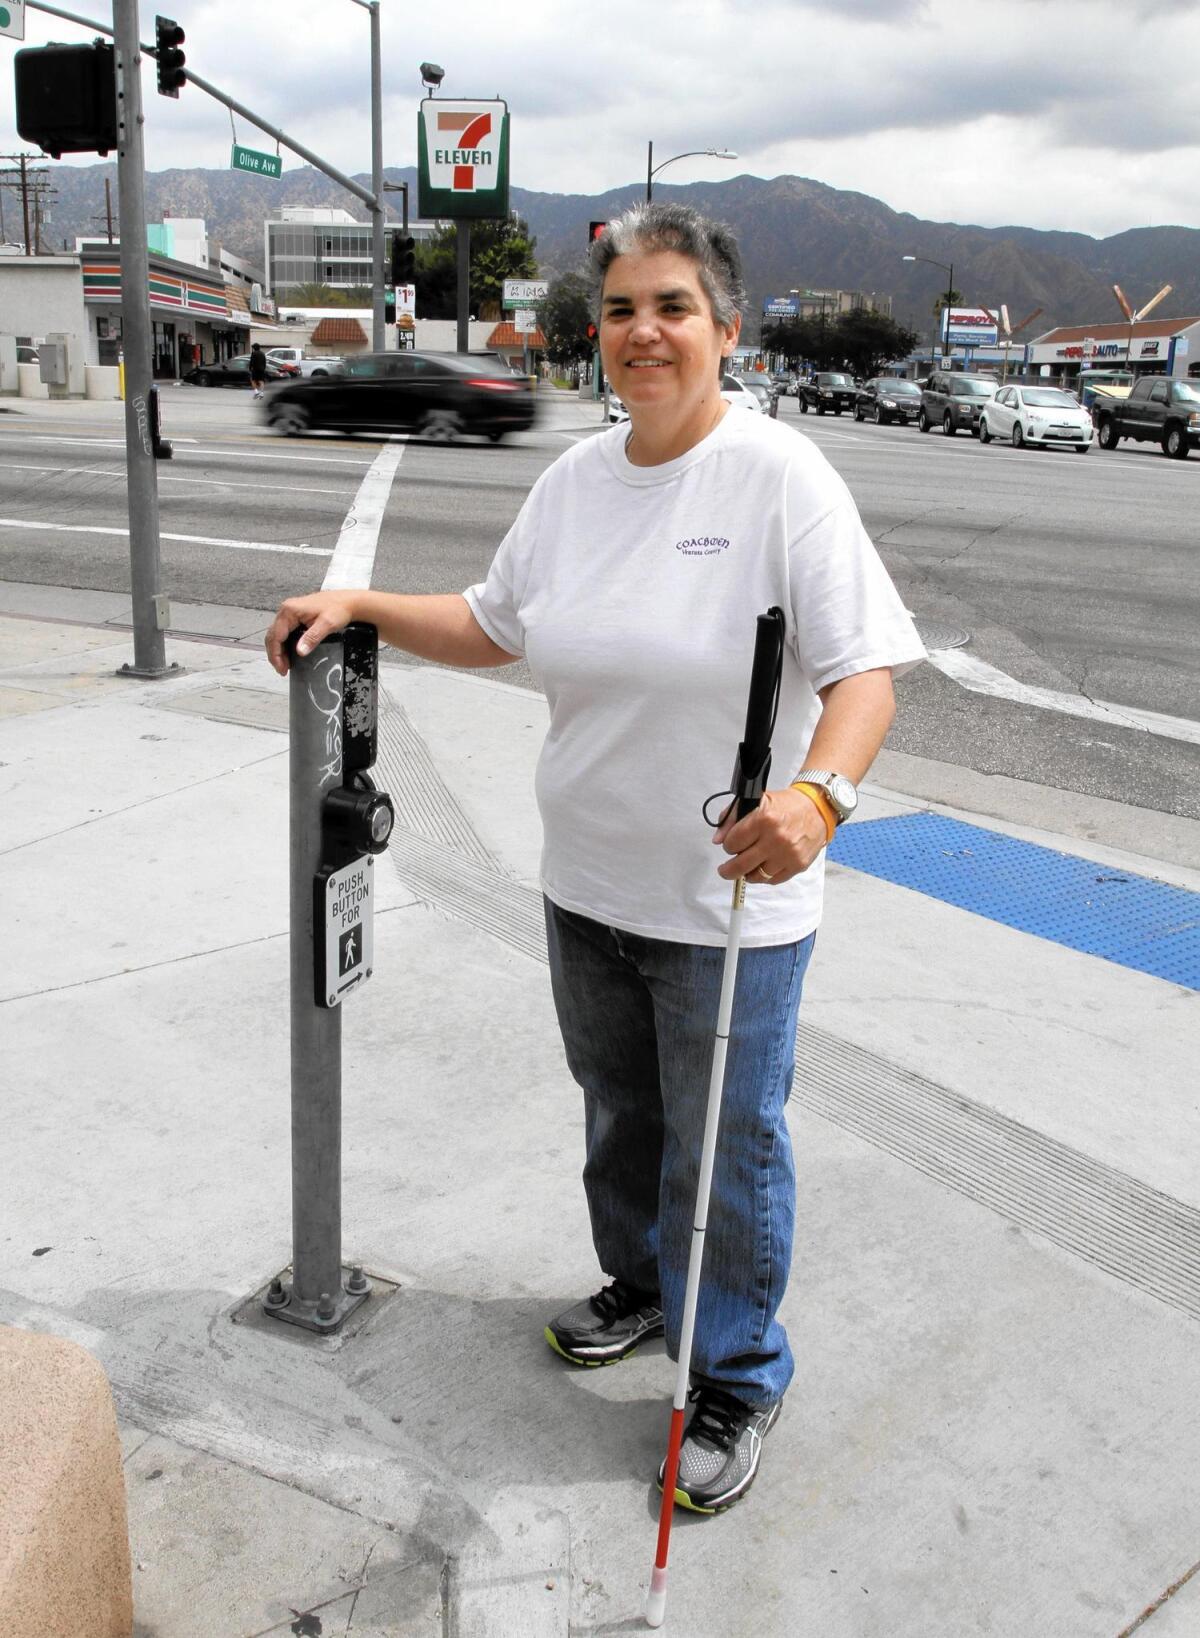 Rosie Lobrutto is happy about the newly installed audible crosswalks near her home at Victory and Olive in Burbank.